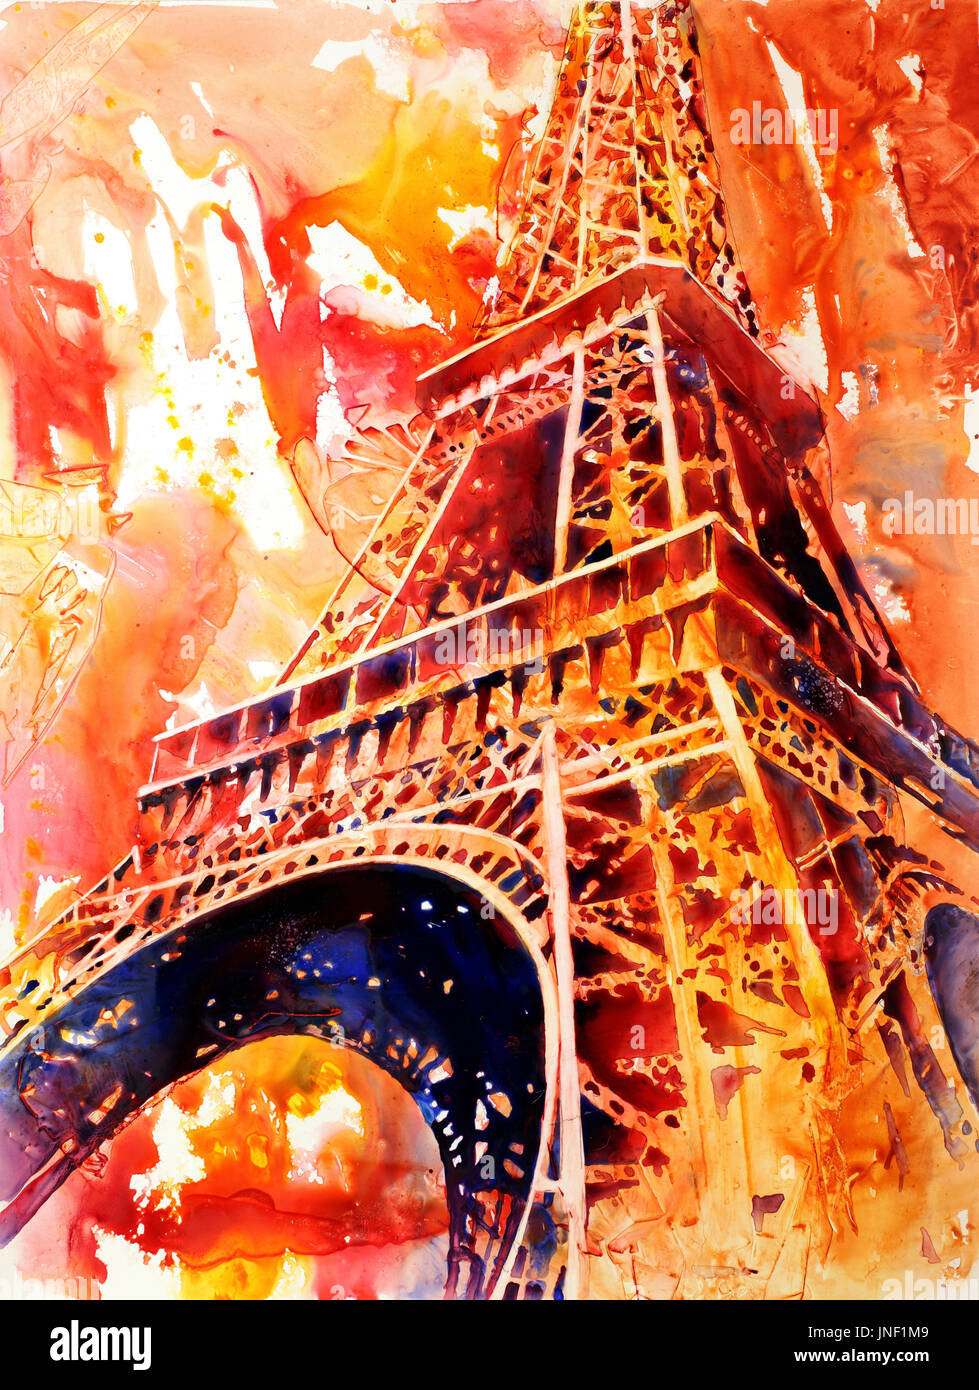 Watercolor painting of the iron lattice of the Eiffel Tower in Paris, France on YUPO synthetic paper by Raleigh, NC artist Ryan Fox Stock Photo